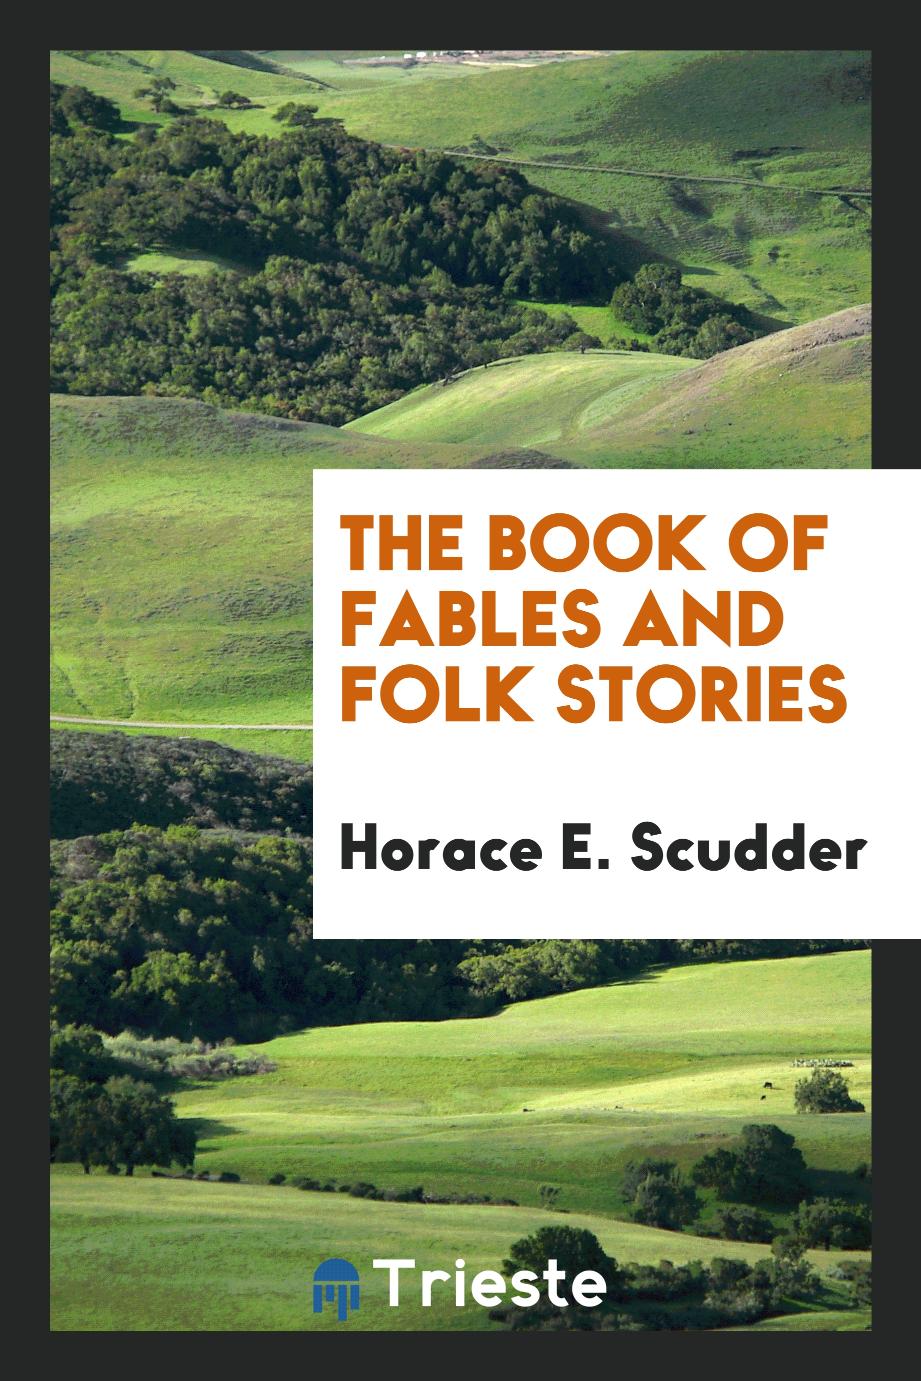 The book of fables and folk stories